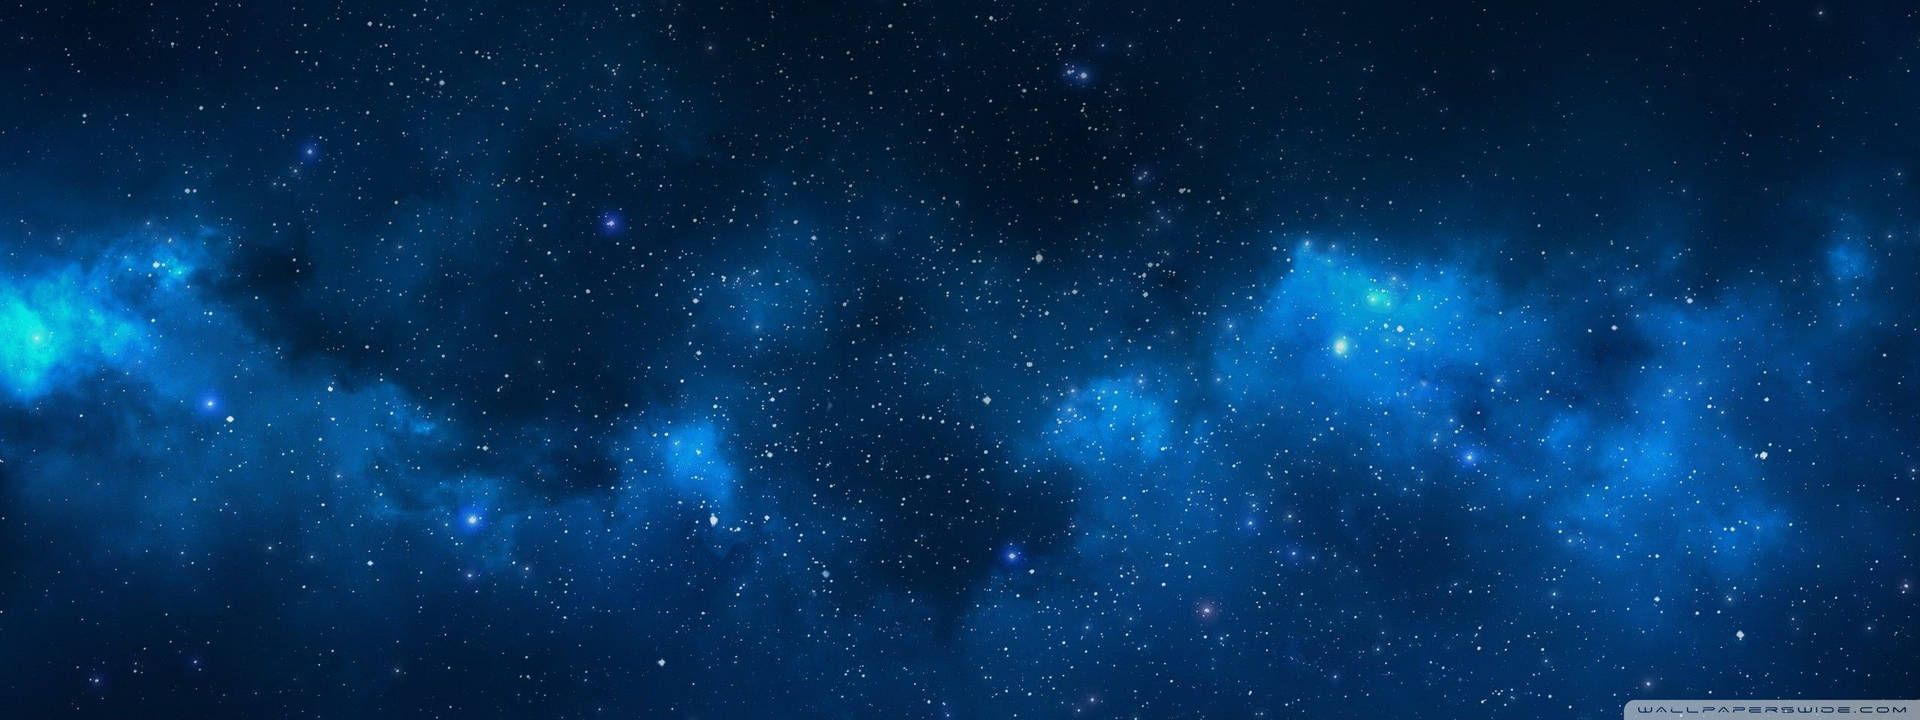 Marvel At The Starry Night Sky Background